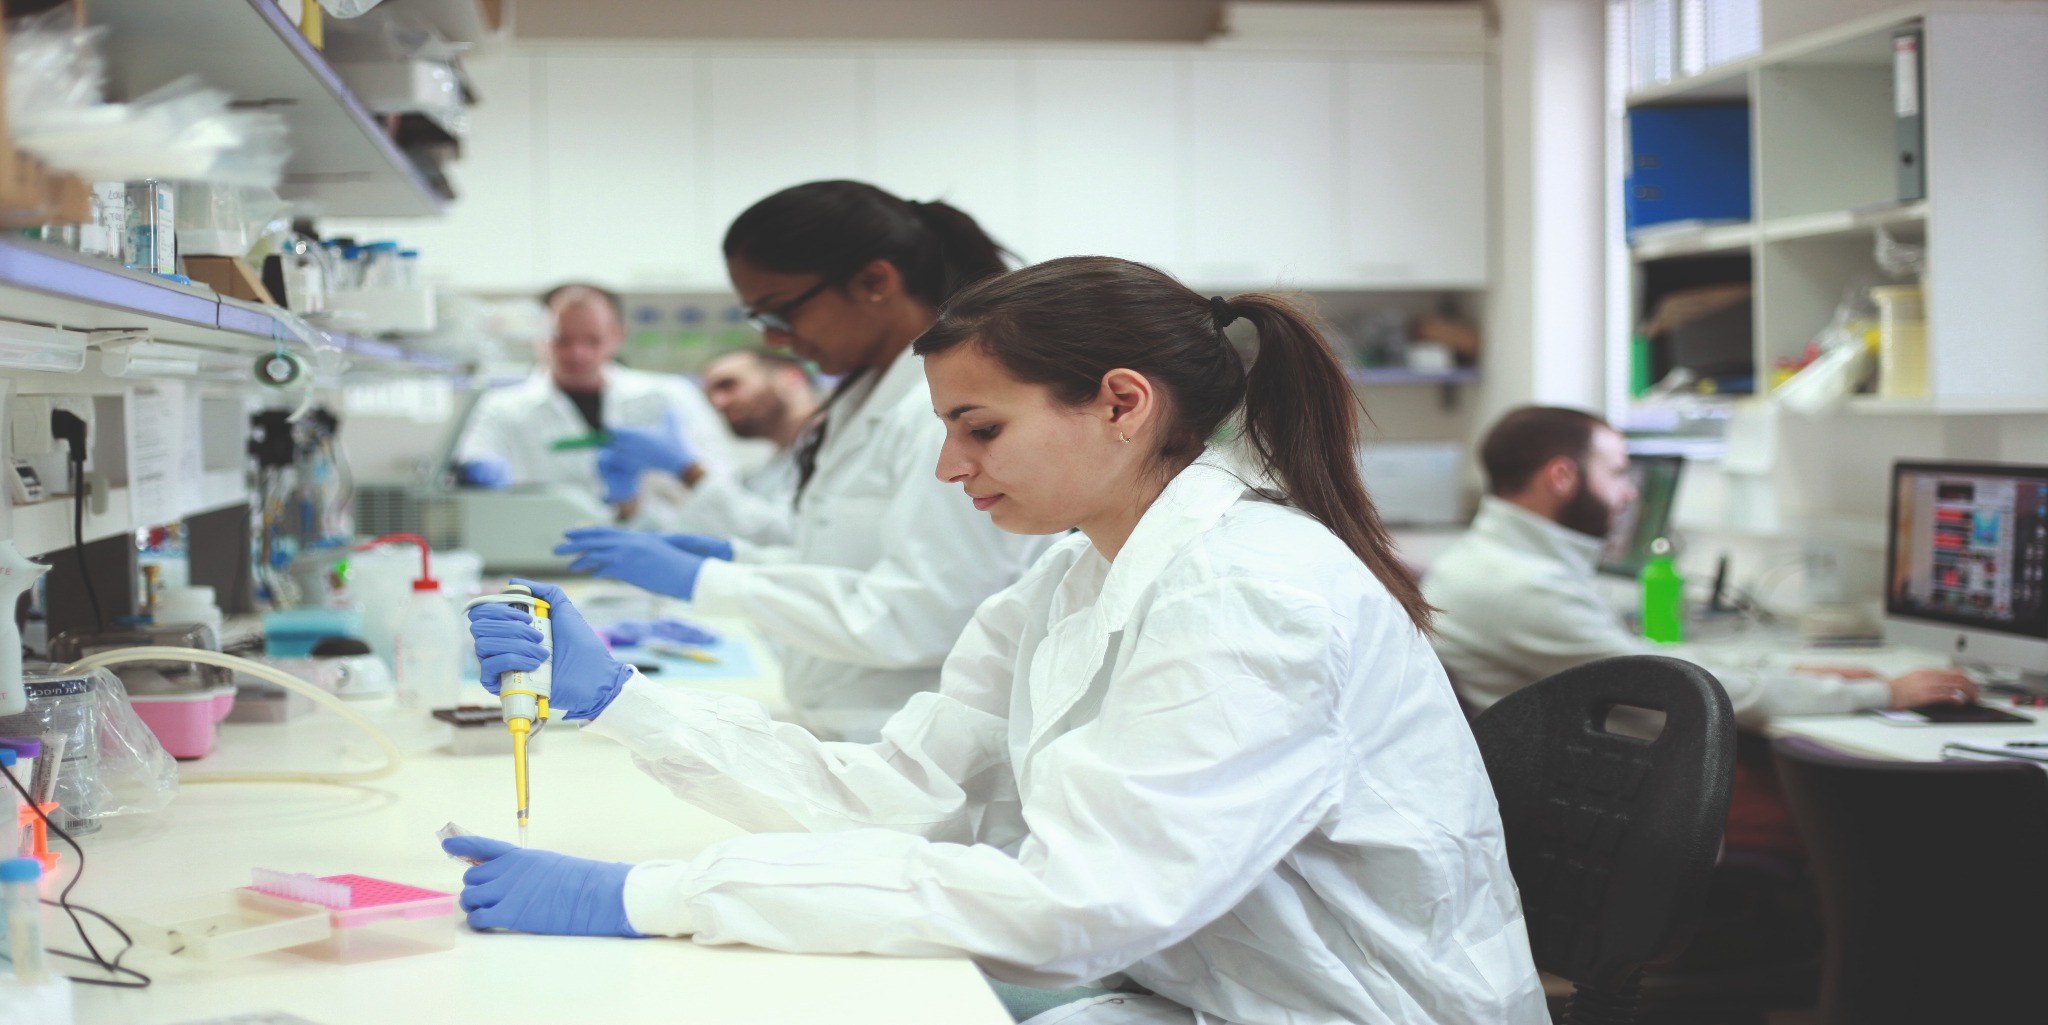 Students in a laboratory. (Credit: Ilan Besor)